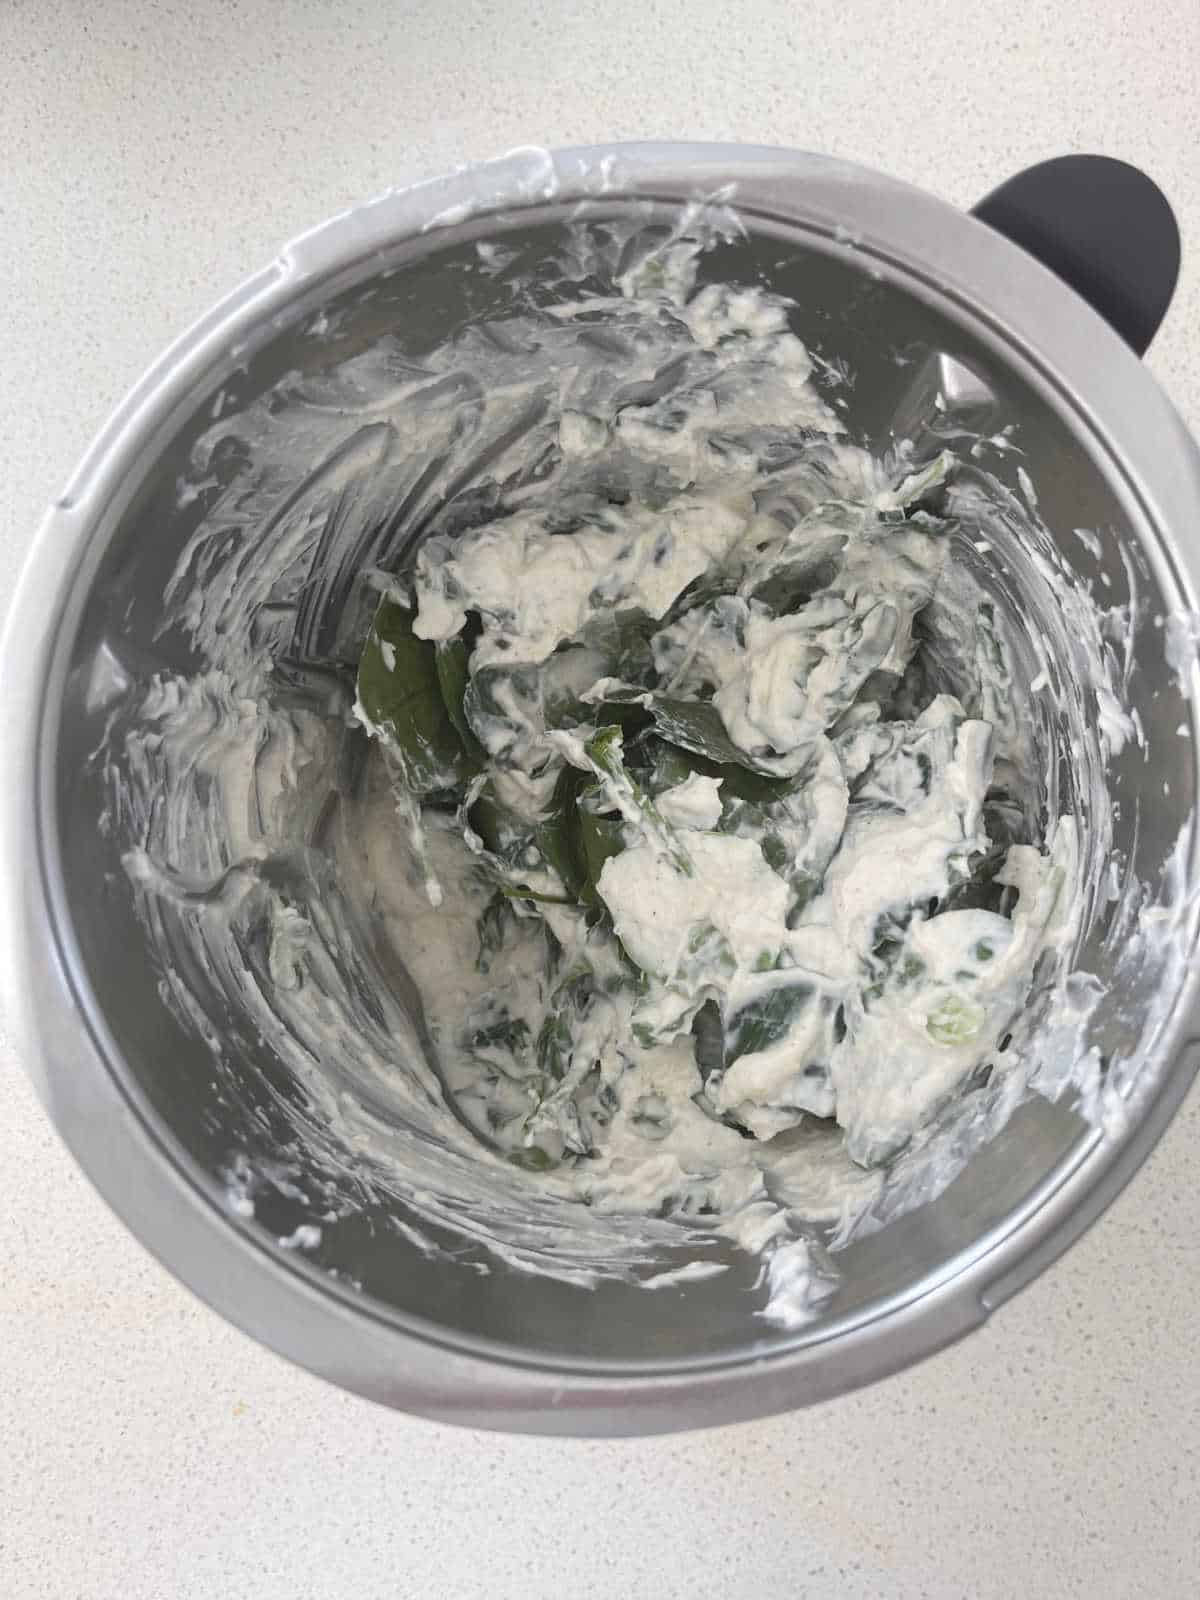 mixture for spinach and ricotta cannelloni in thermomix bowl.